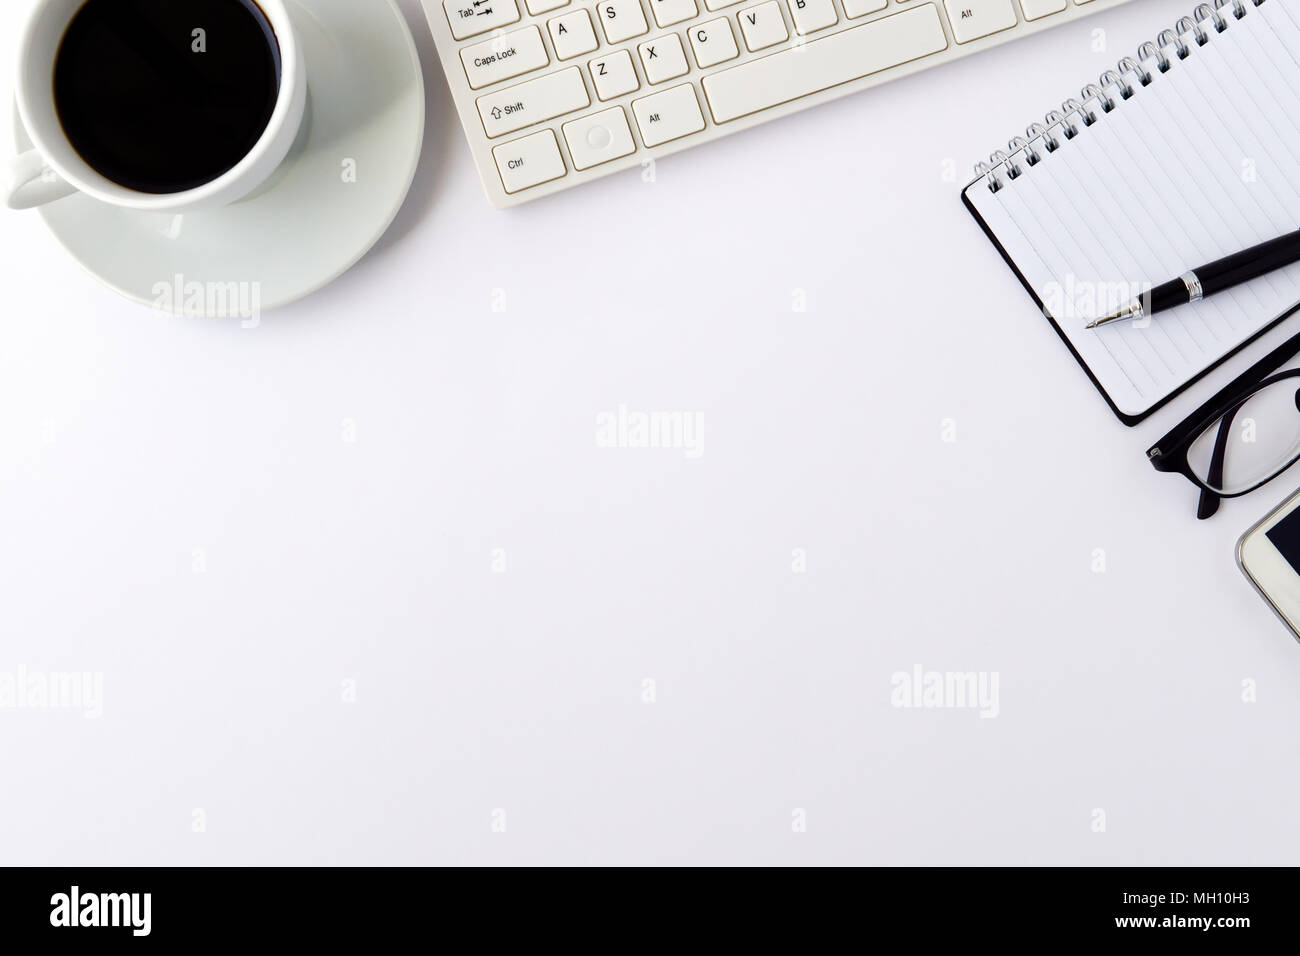 Office desk table with blank notebook page with pen, computer keyboard and cup of coffee. Top view, flat lay. Stock Photo